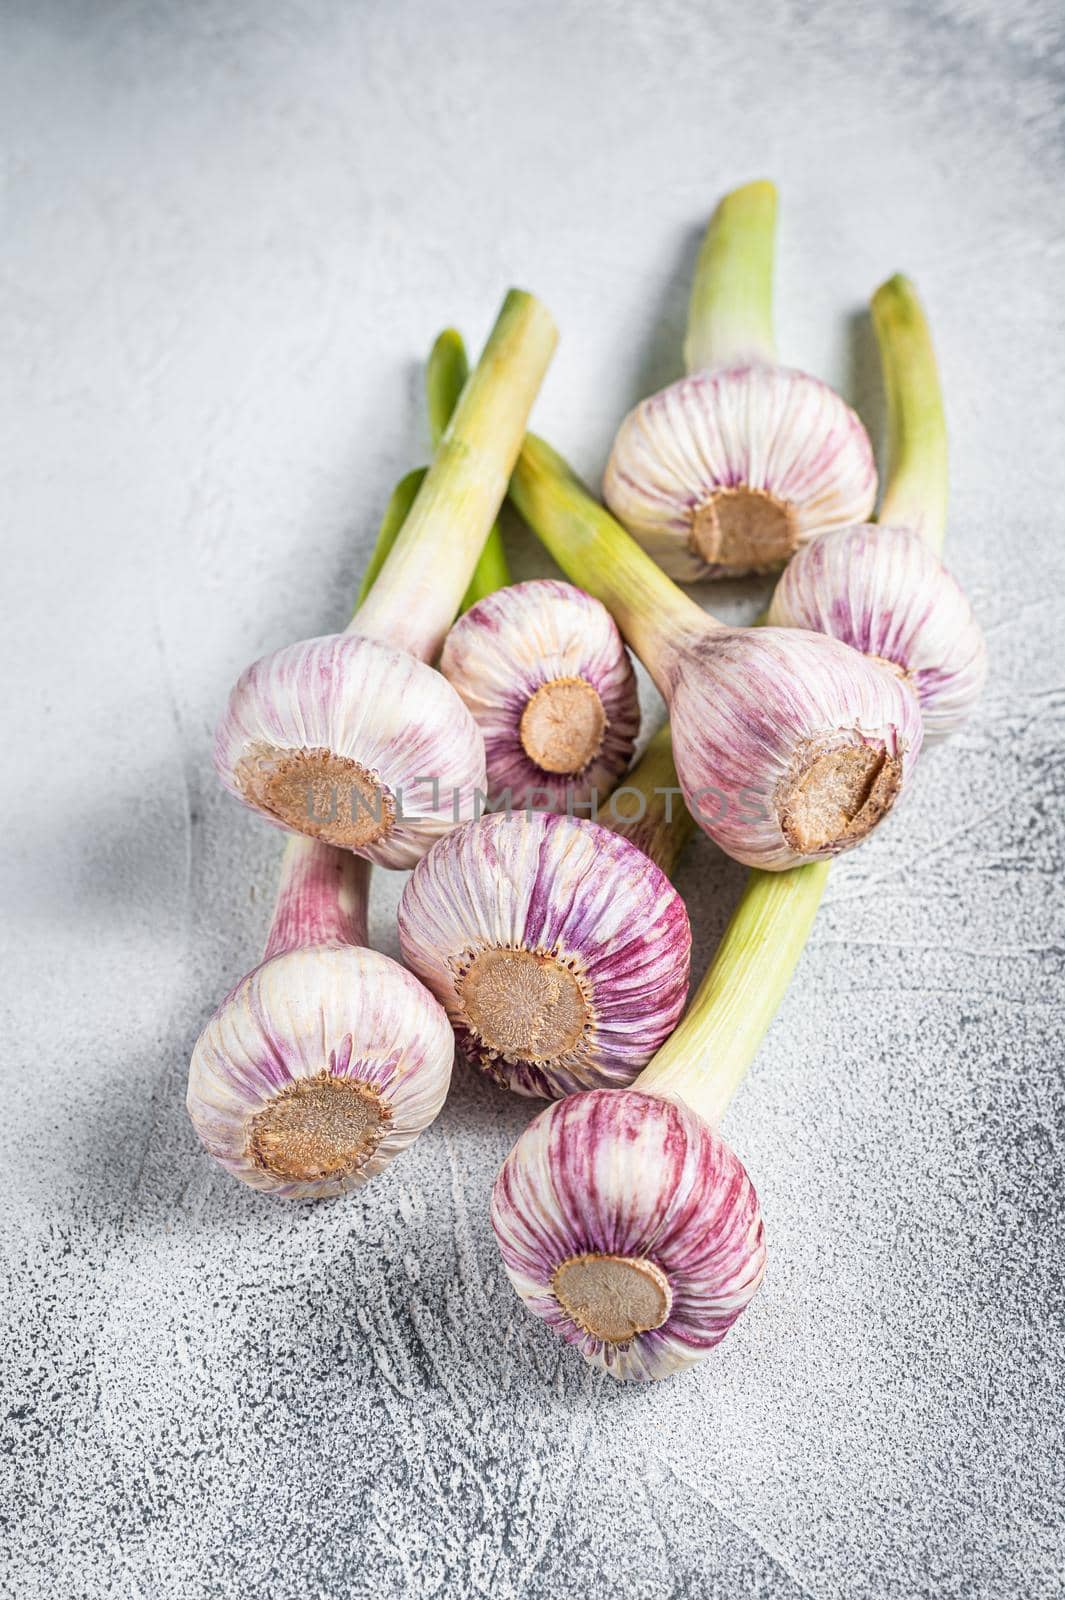 Spring young garlic bulbs on kitchen table. White background. Top view by Composter